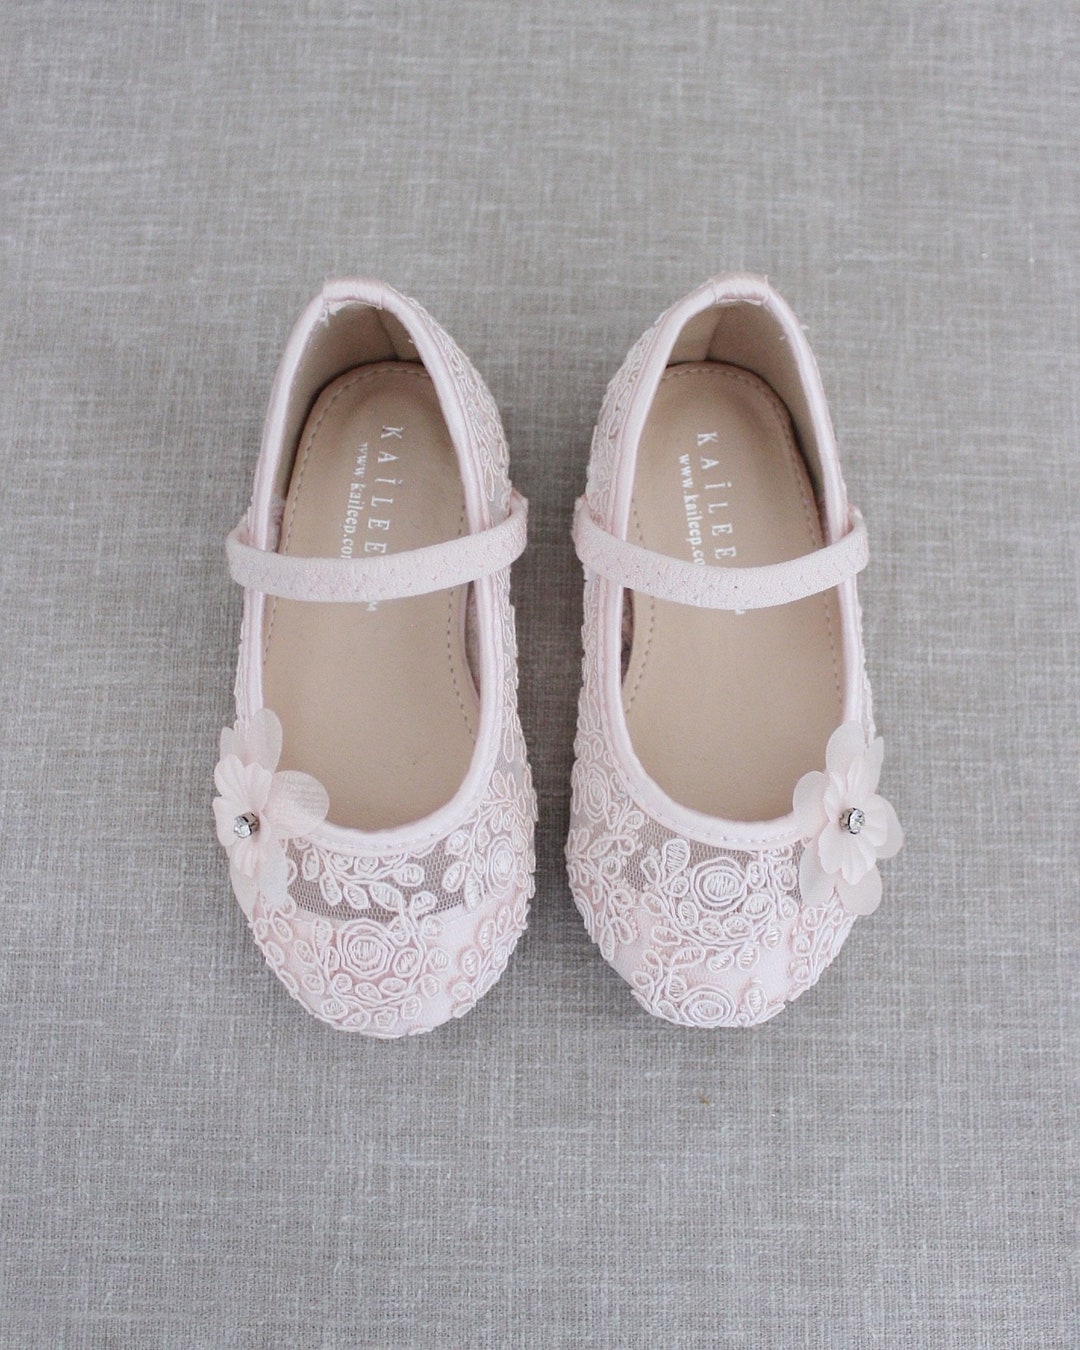 Dusty Pink Crochet Lace Mary Jane Flats With Flower Applique - Etsy